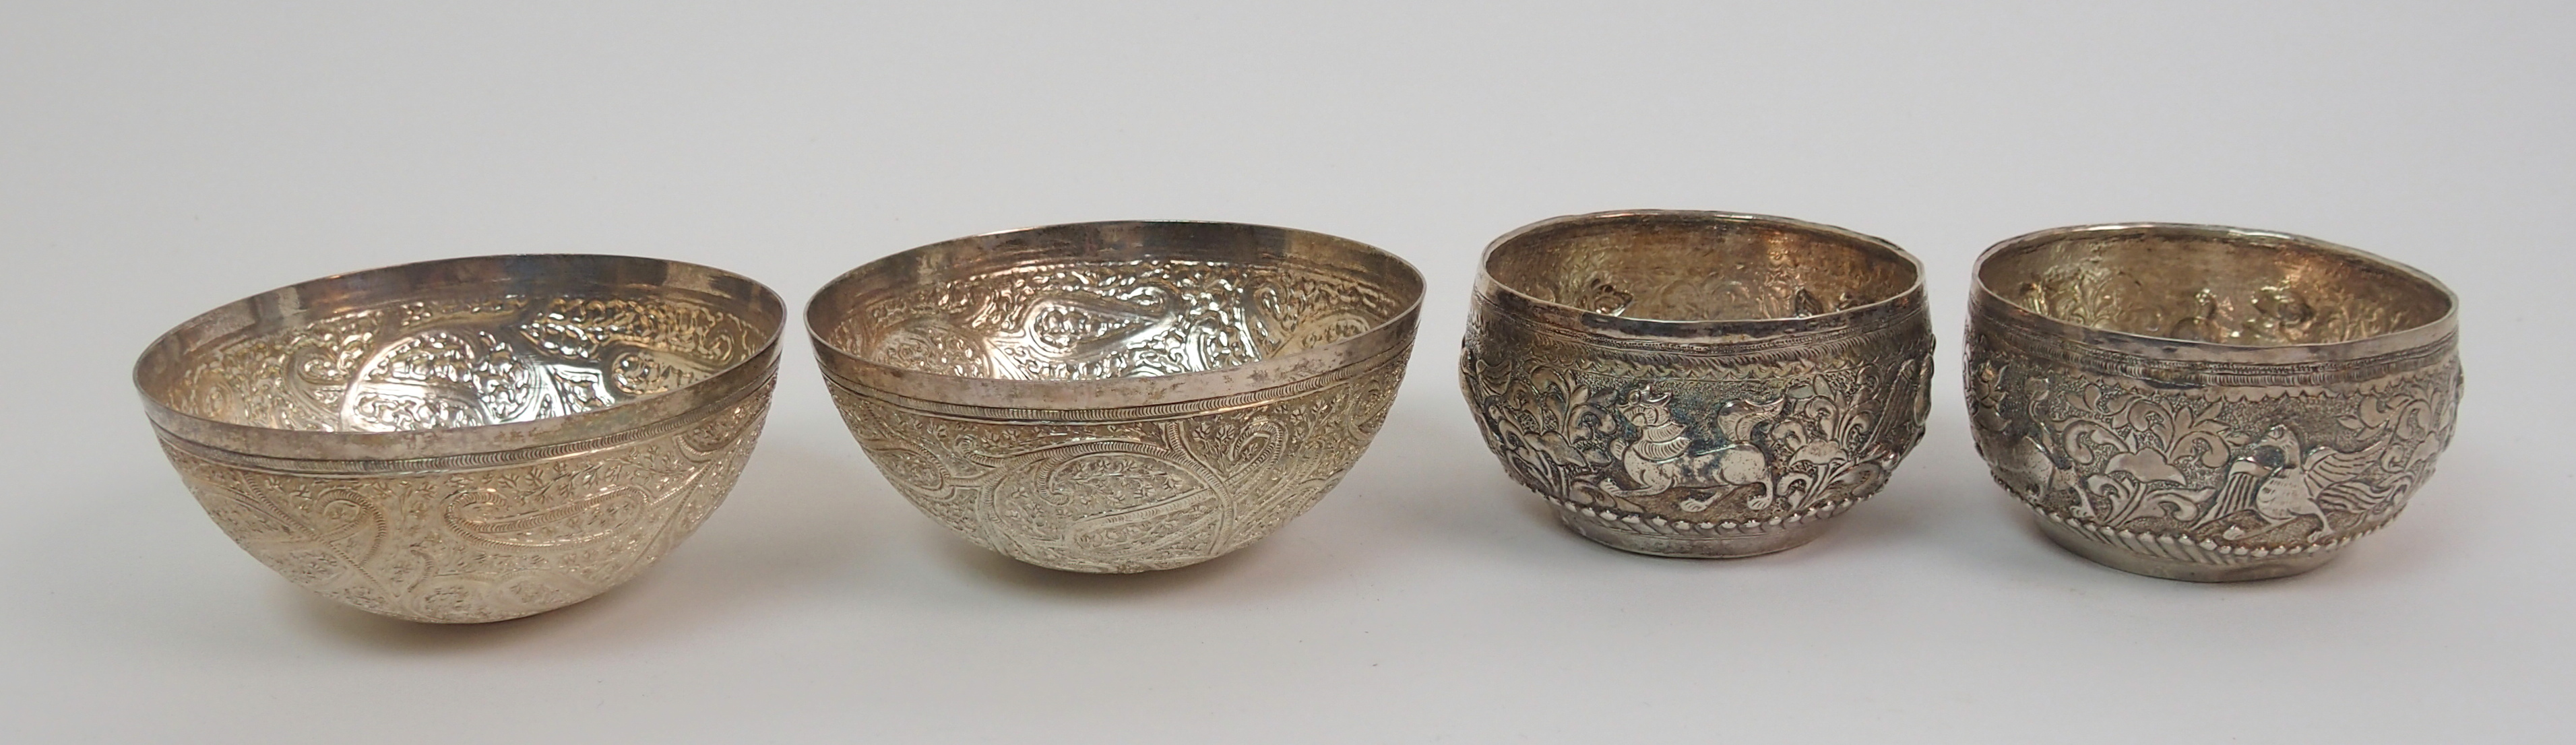 Nine Eastern white metal bowls 7.5 to 9.5cm diameter, a salver decorated with animals 26cm - Image 9 of 10